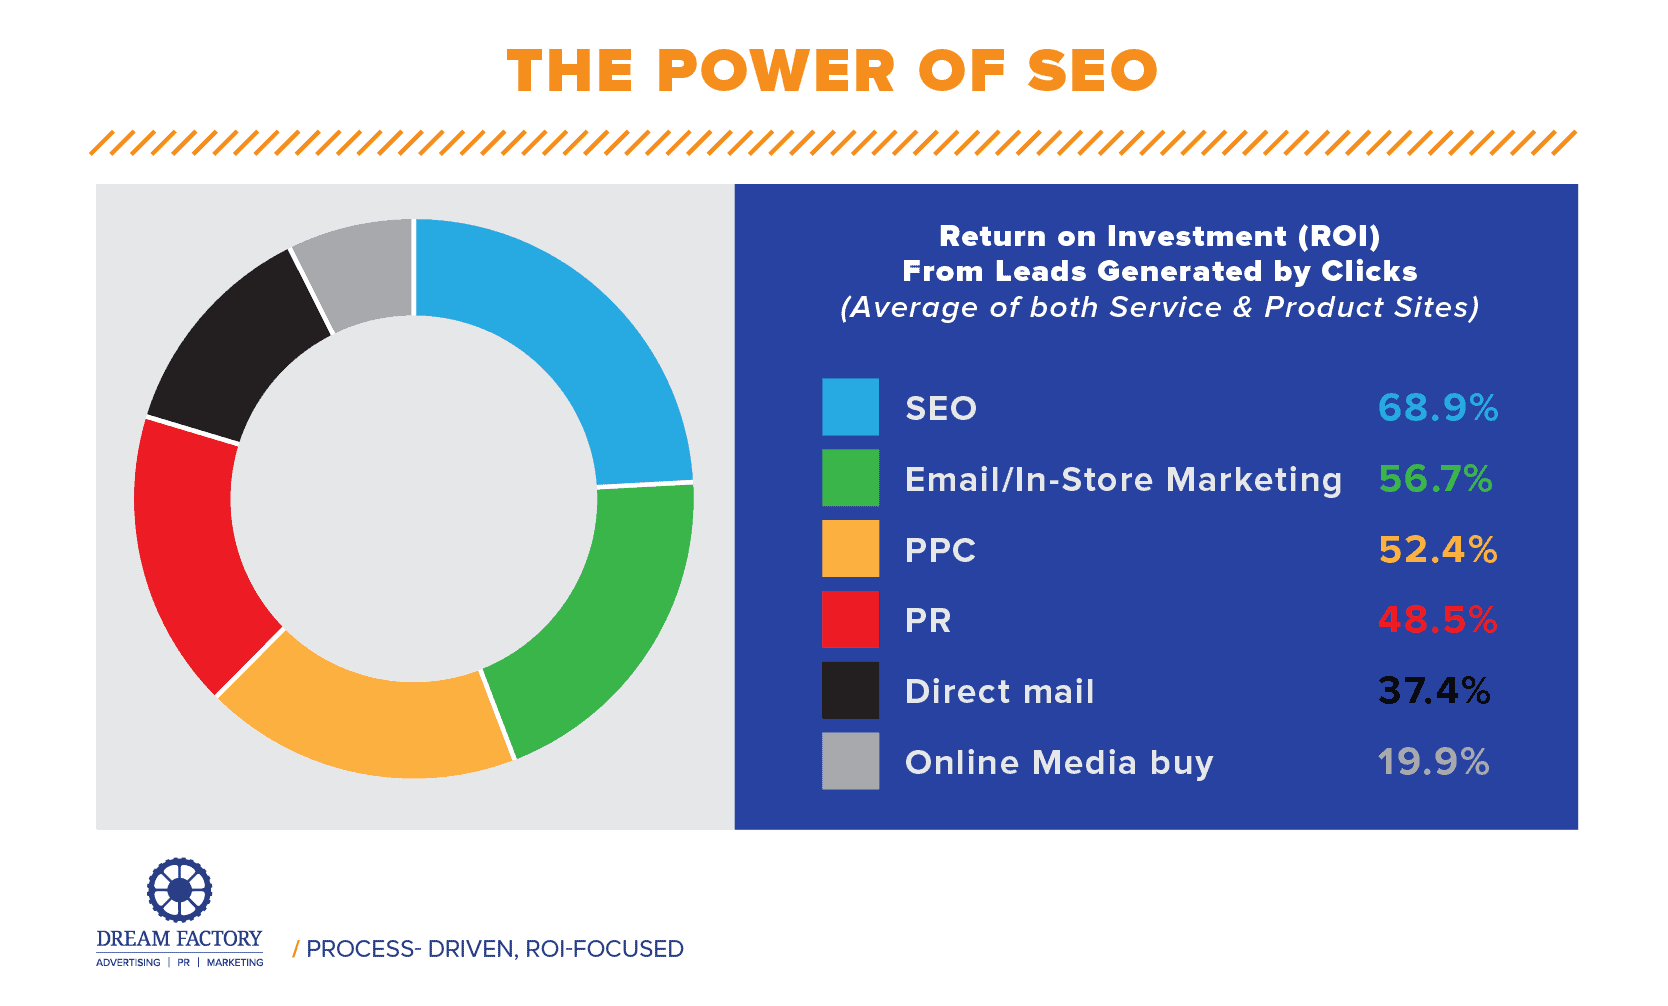 Infographic that shows the power of SEO using graphs to compare sources of lead generation